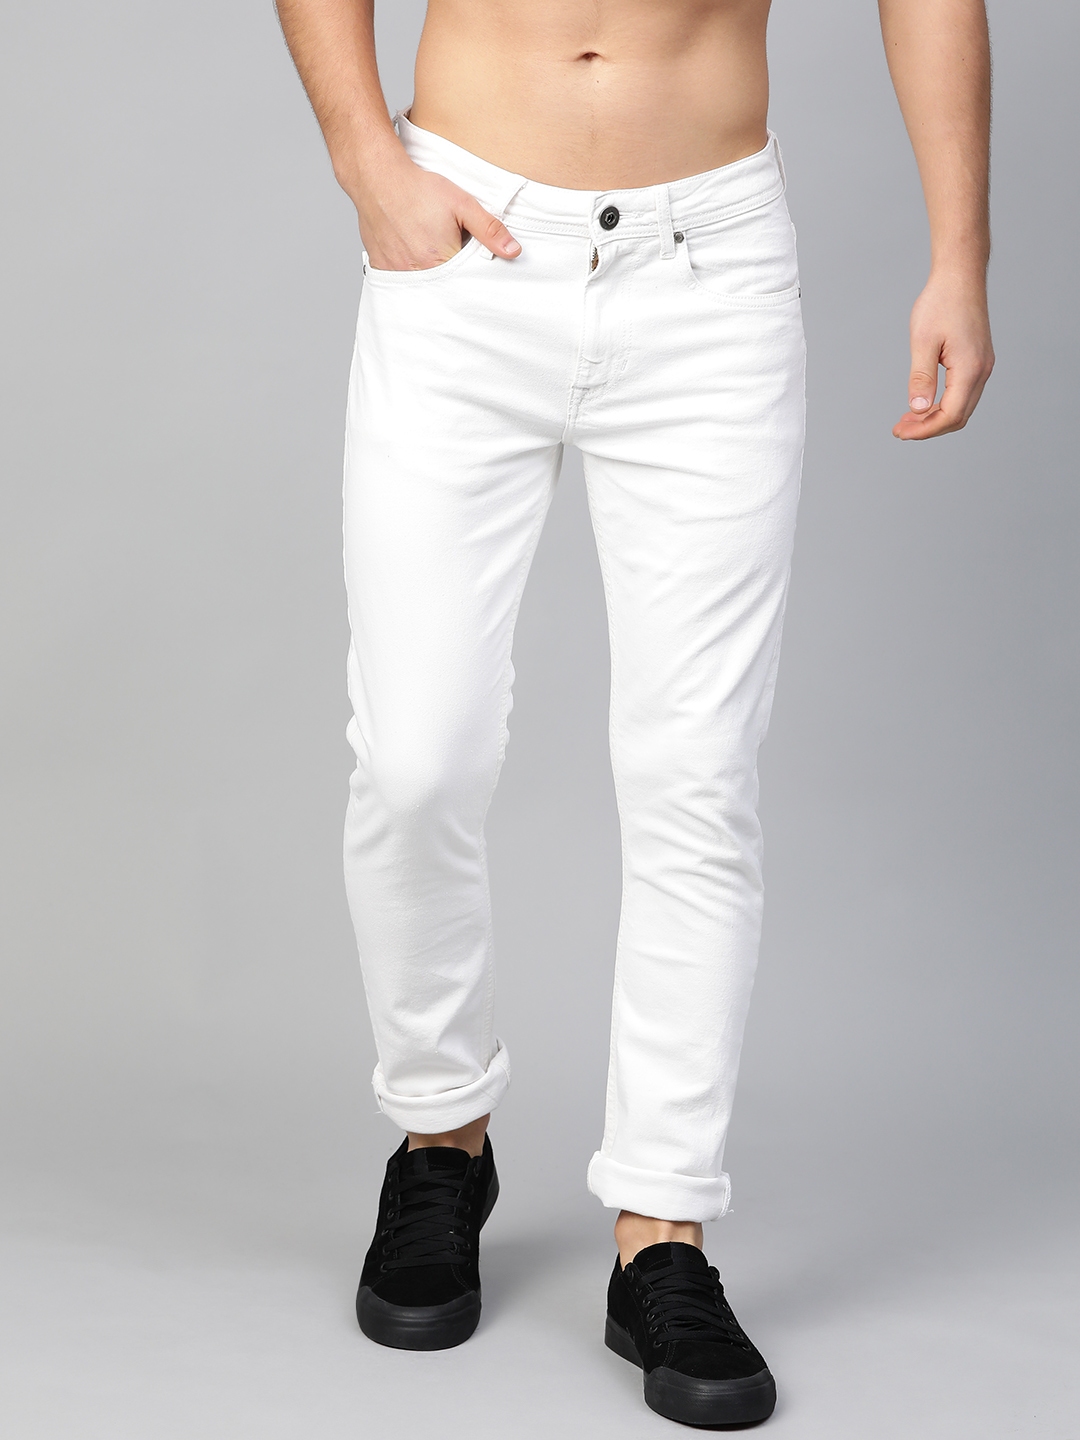 Buy The Roadster Lifestyle Co Men White Skinny Fit Mid Rise Clean Look ...